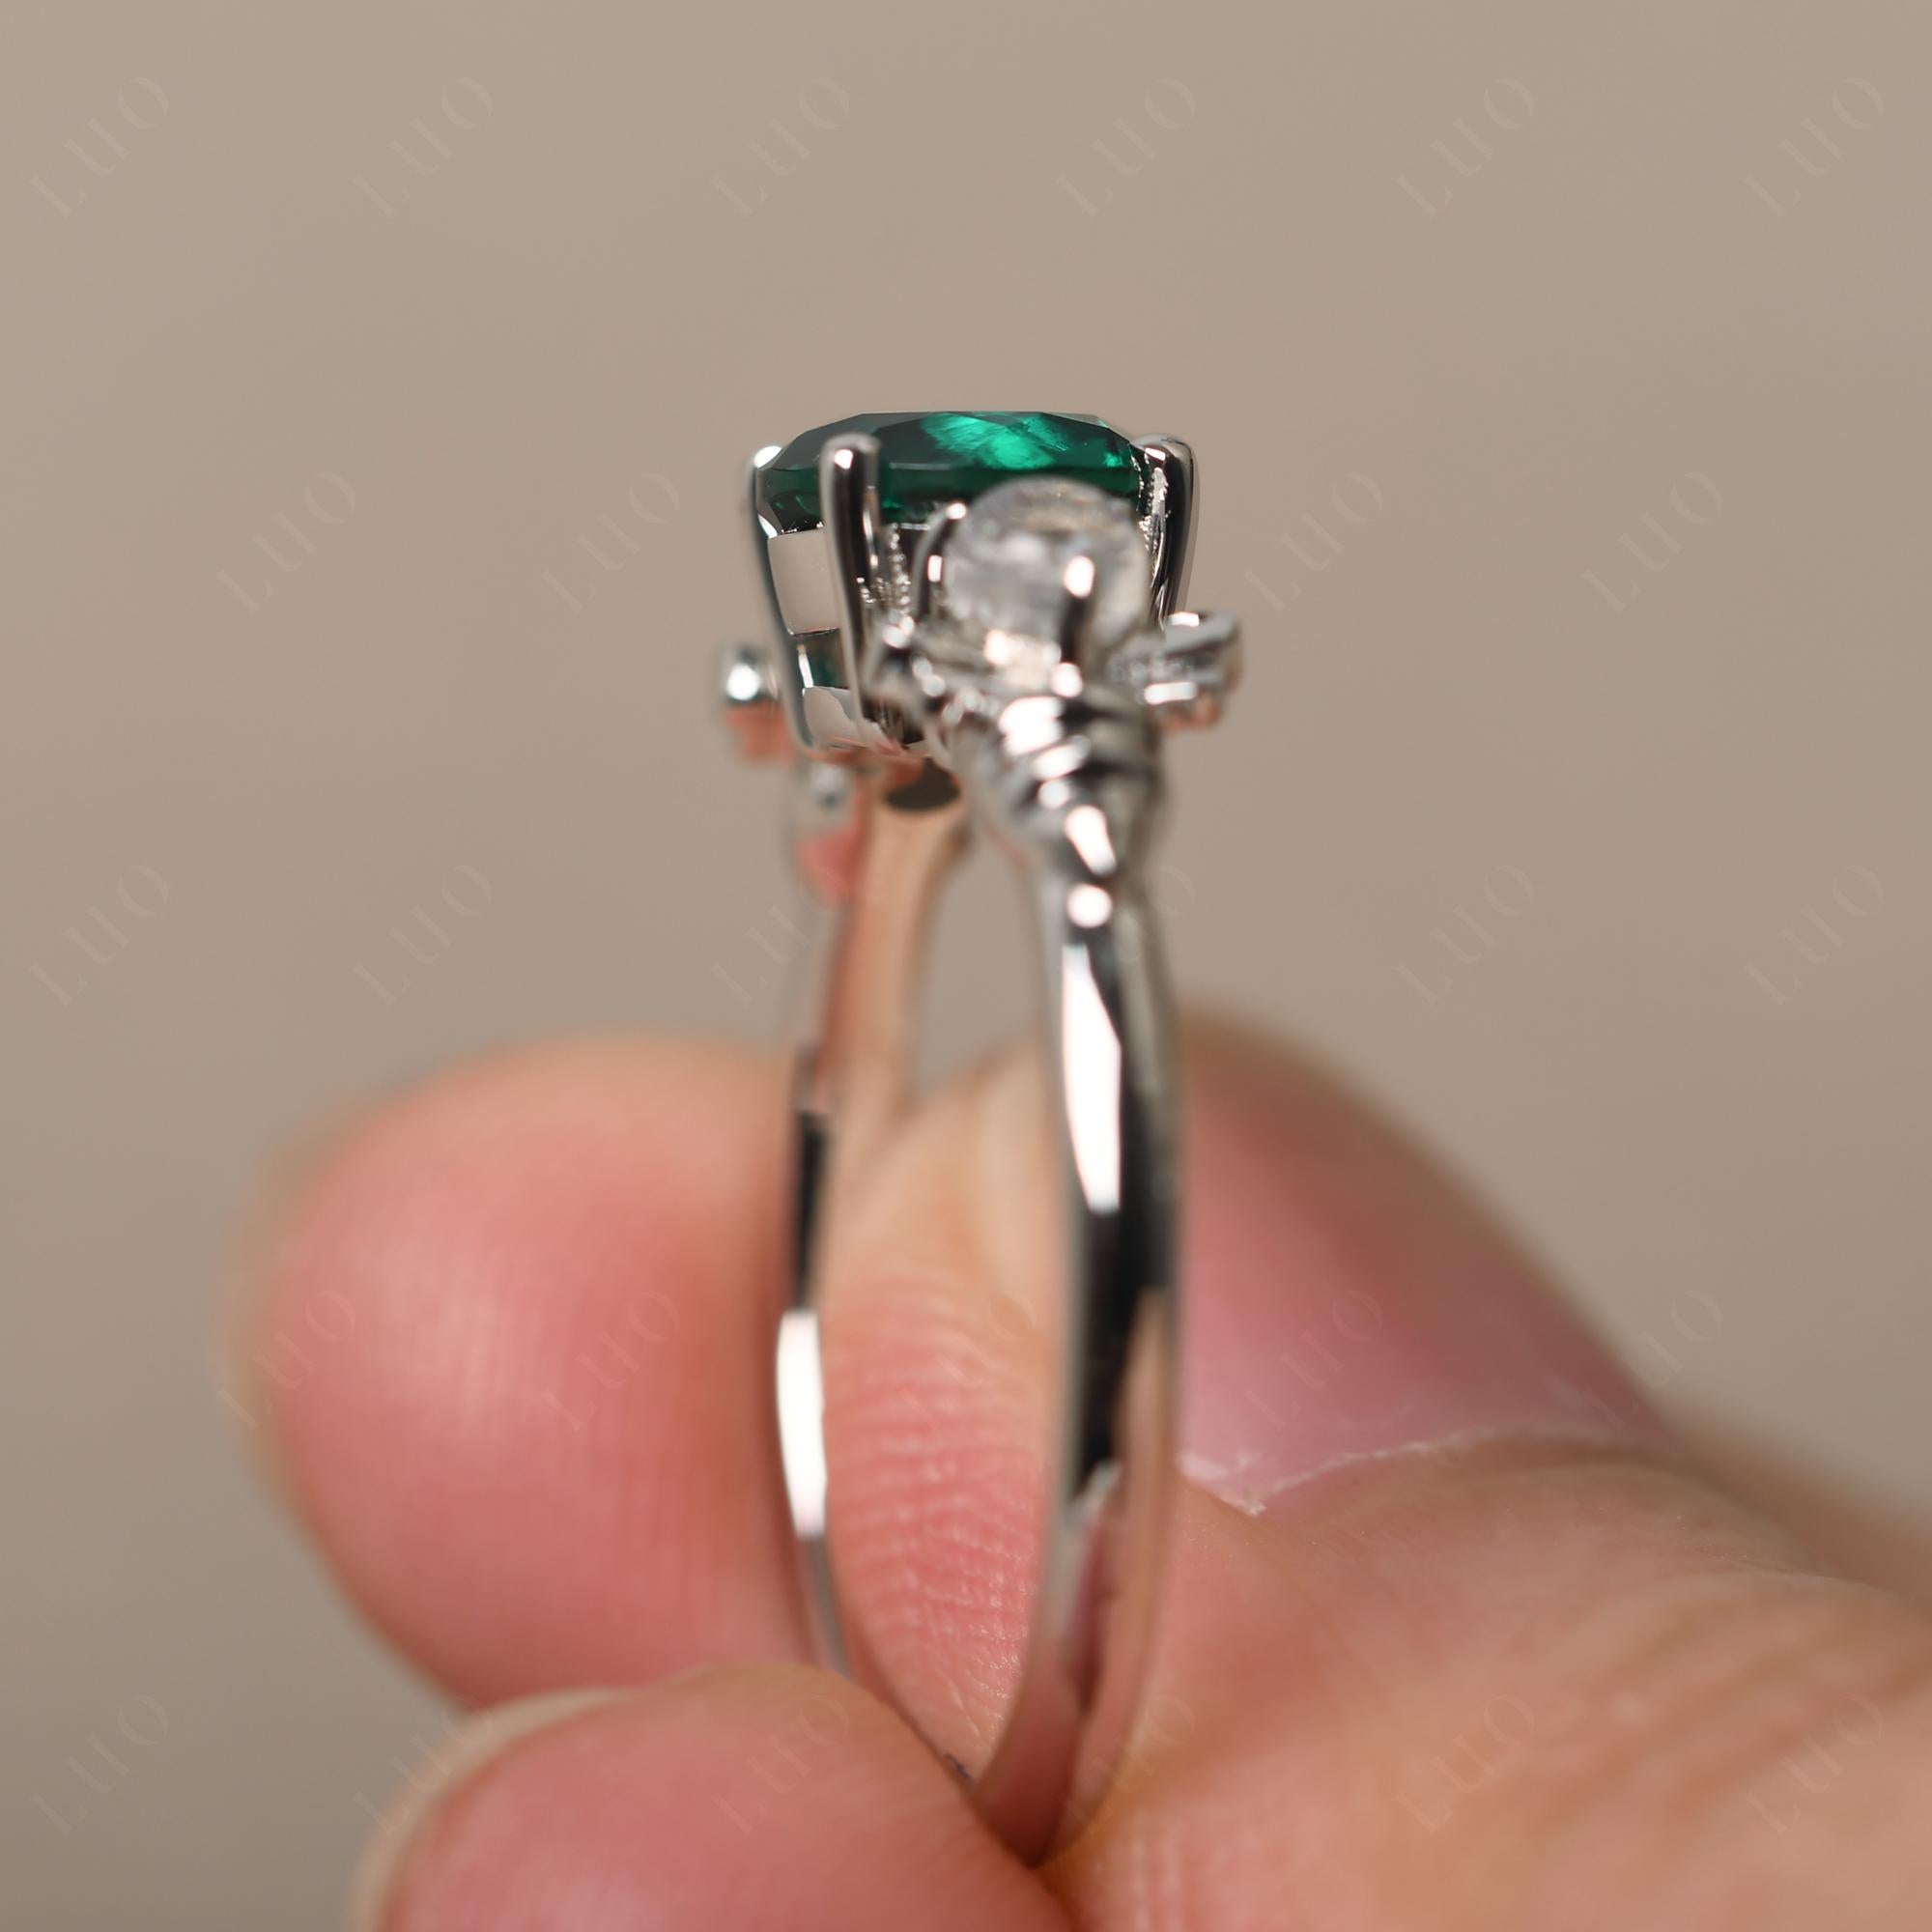 Moonstone and Emerald Bee Ring - LUO Jewelry